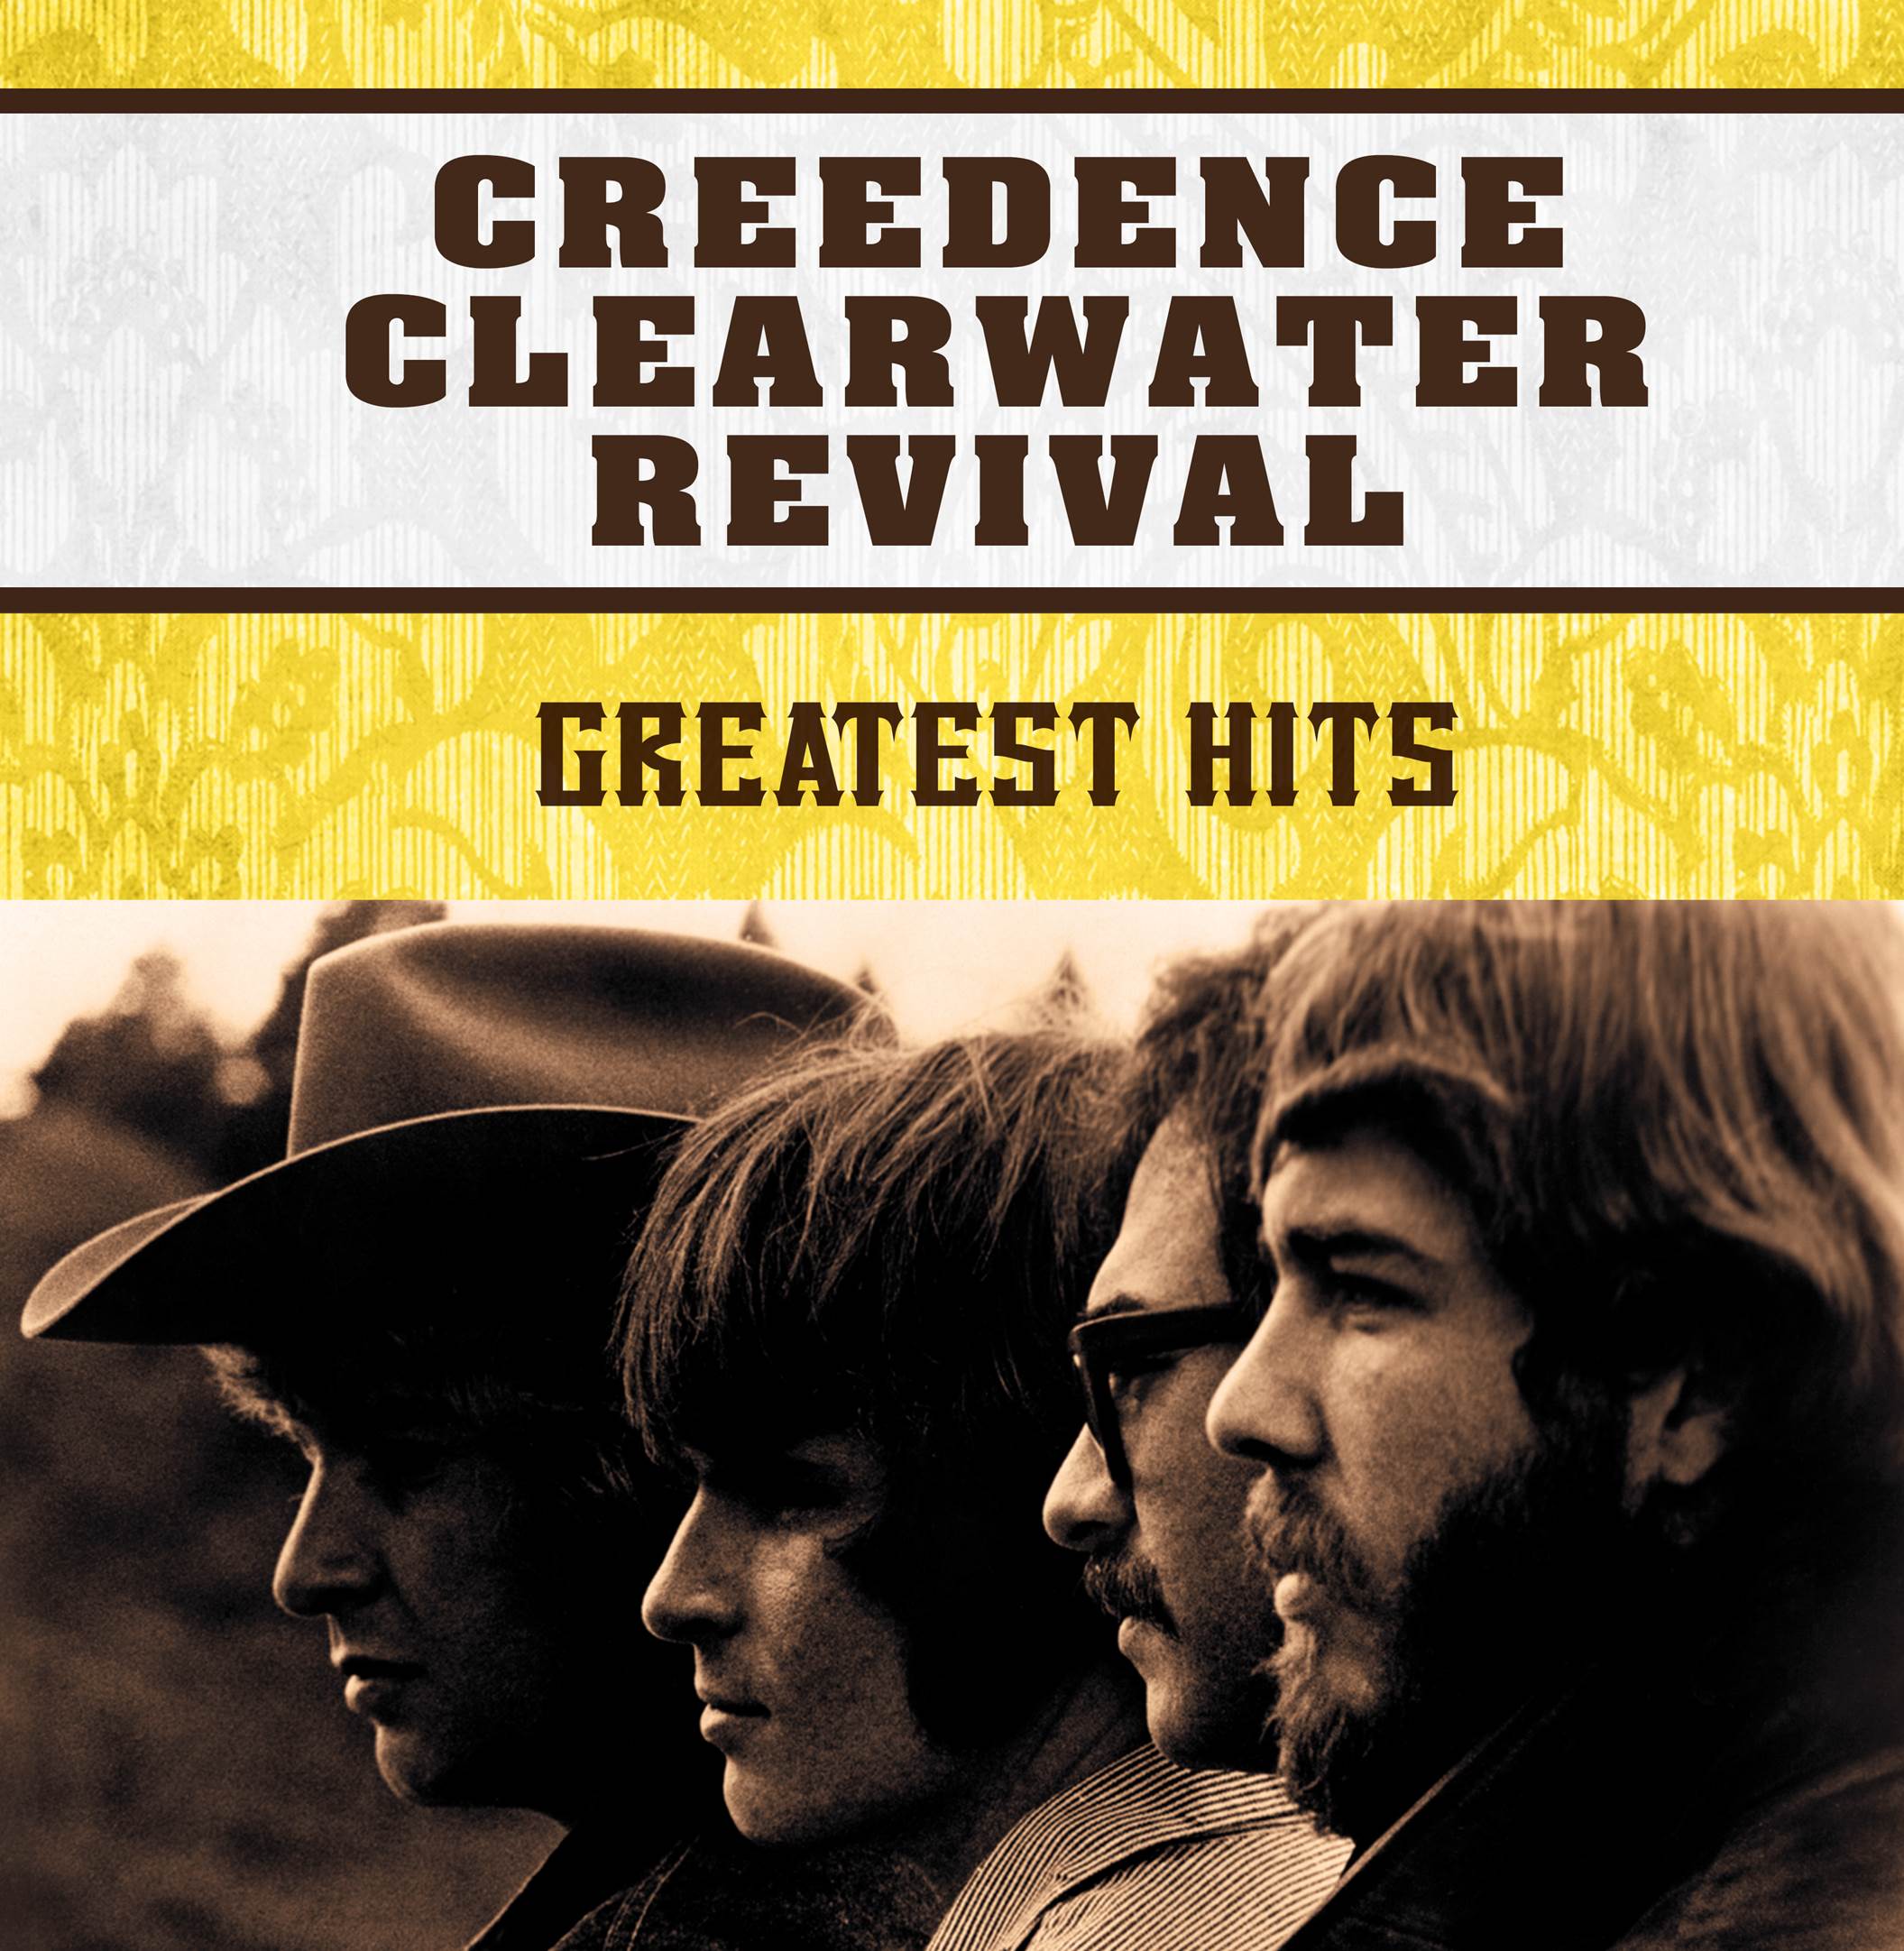 creedence clearwater revival the ingles collection songs